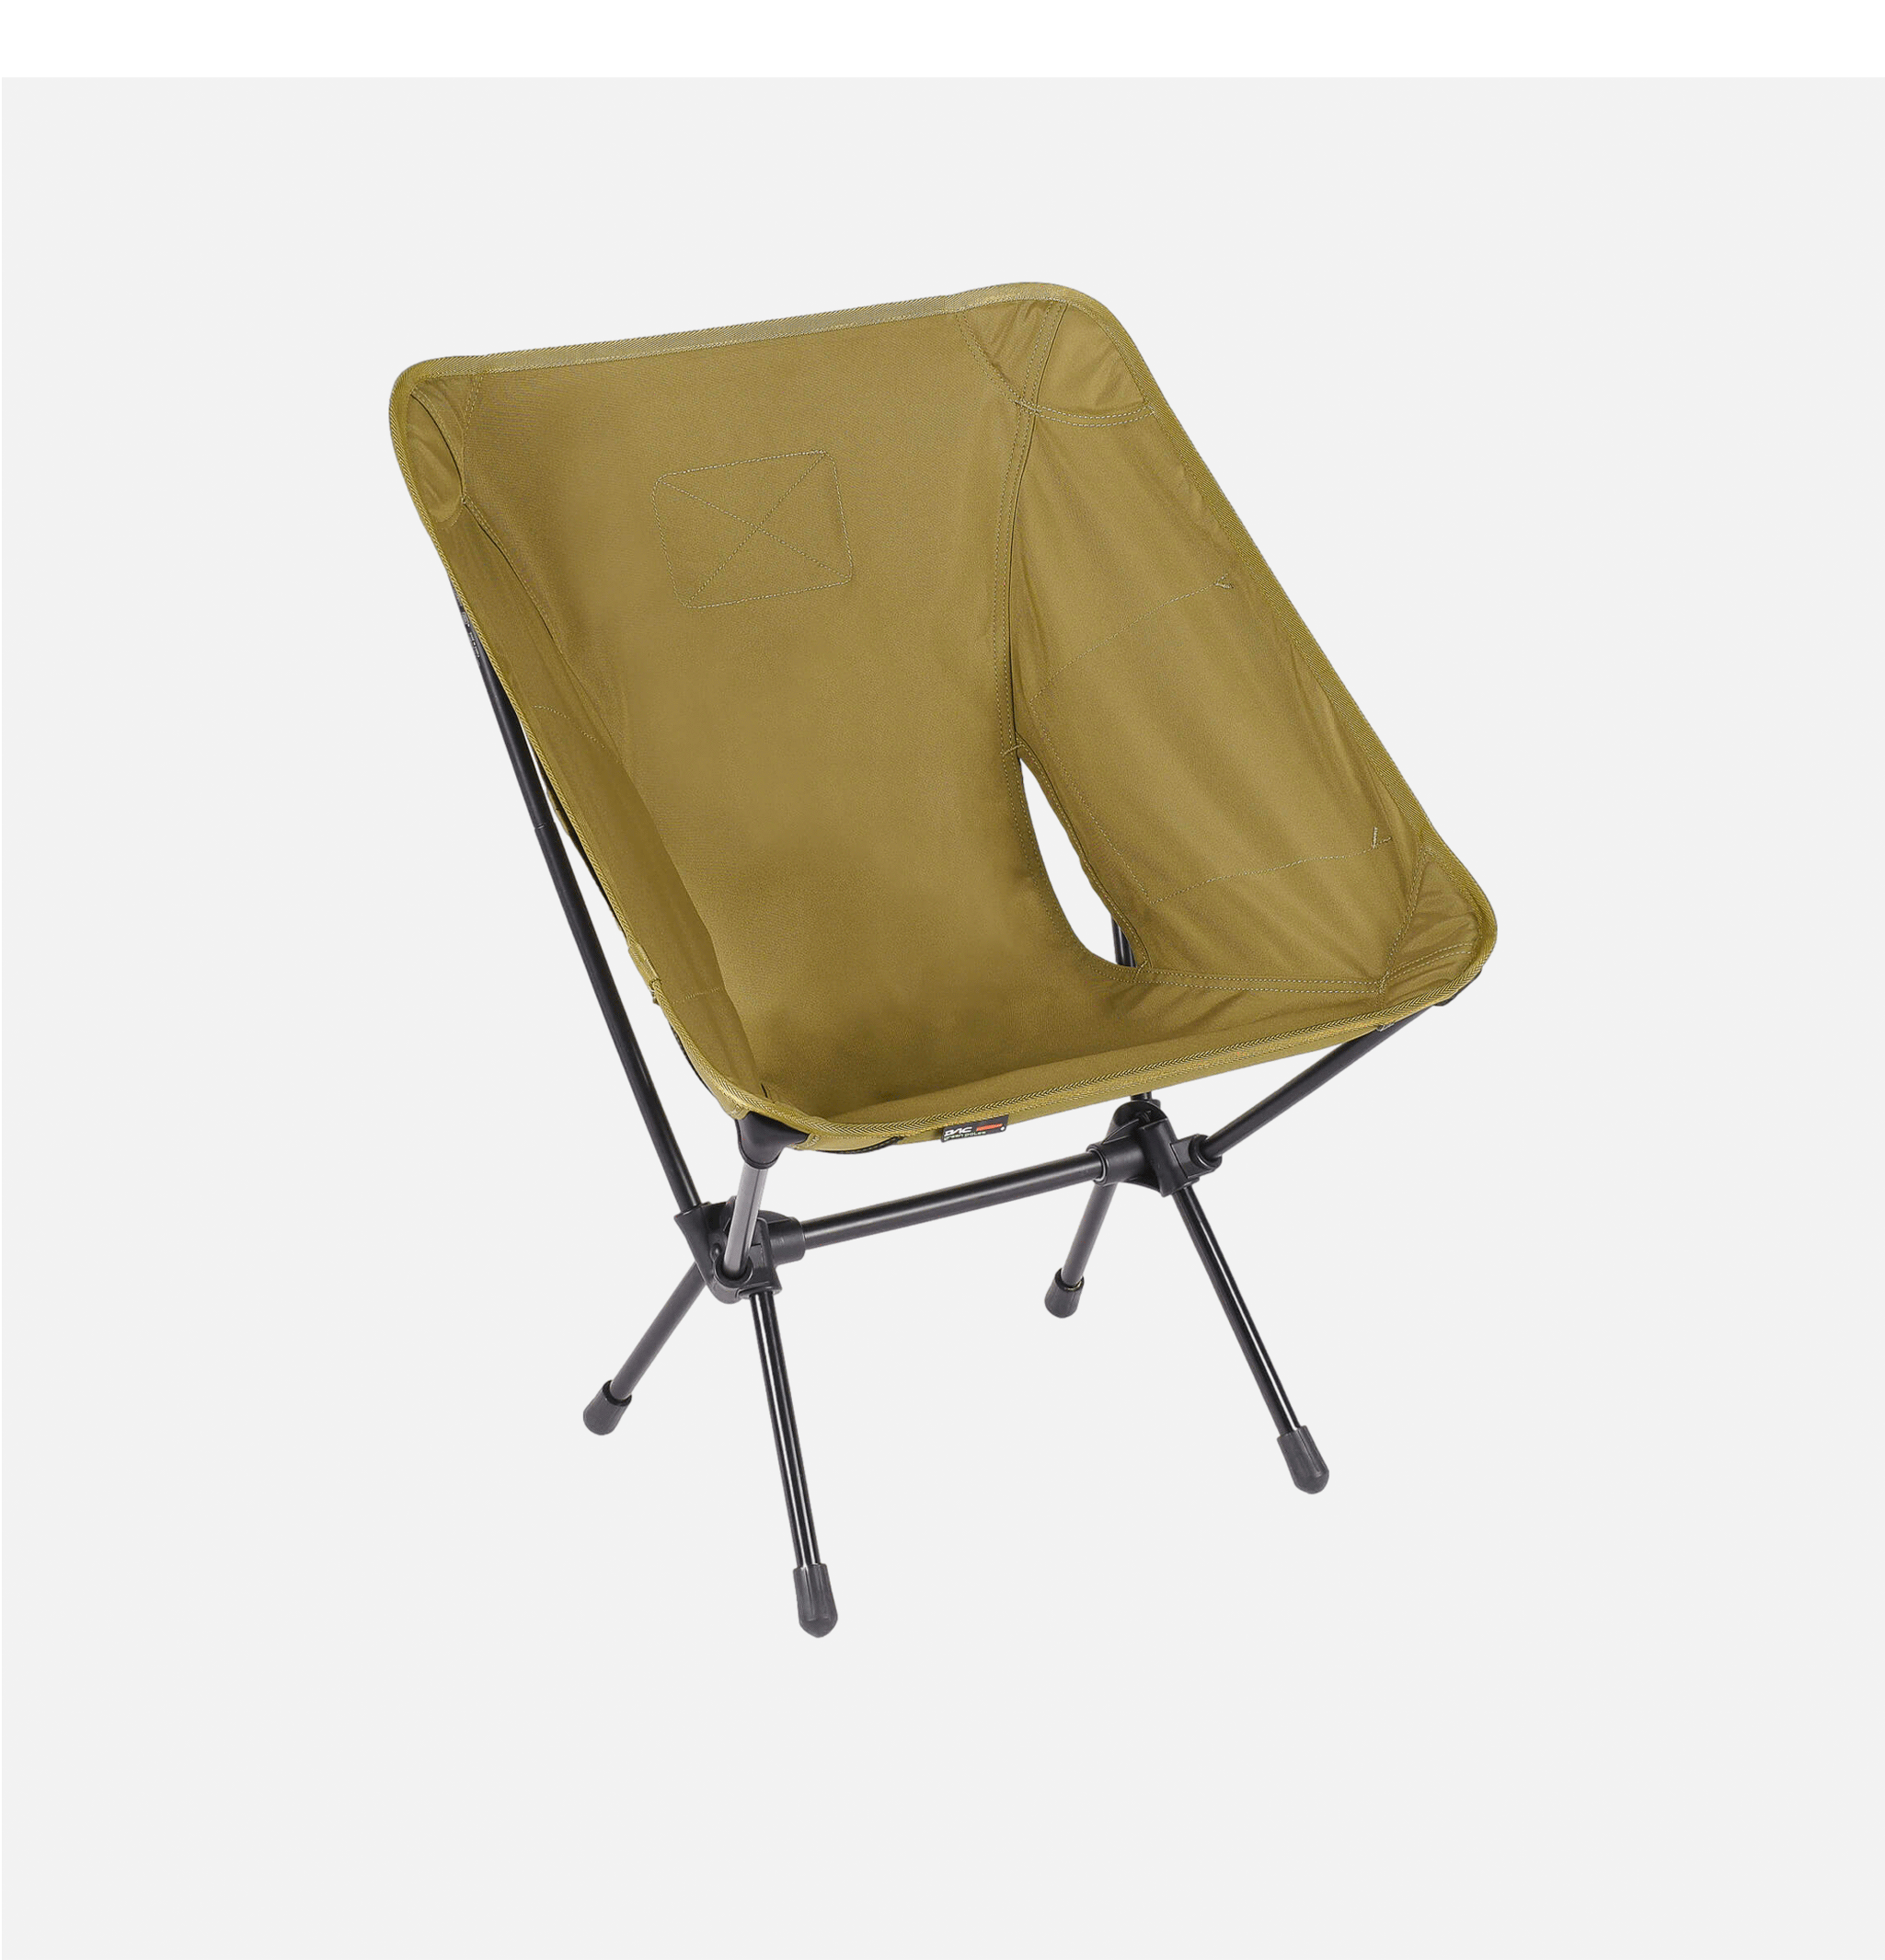 Coyote Tan tactical chair